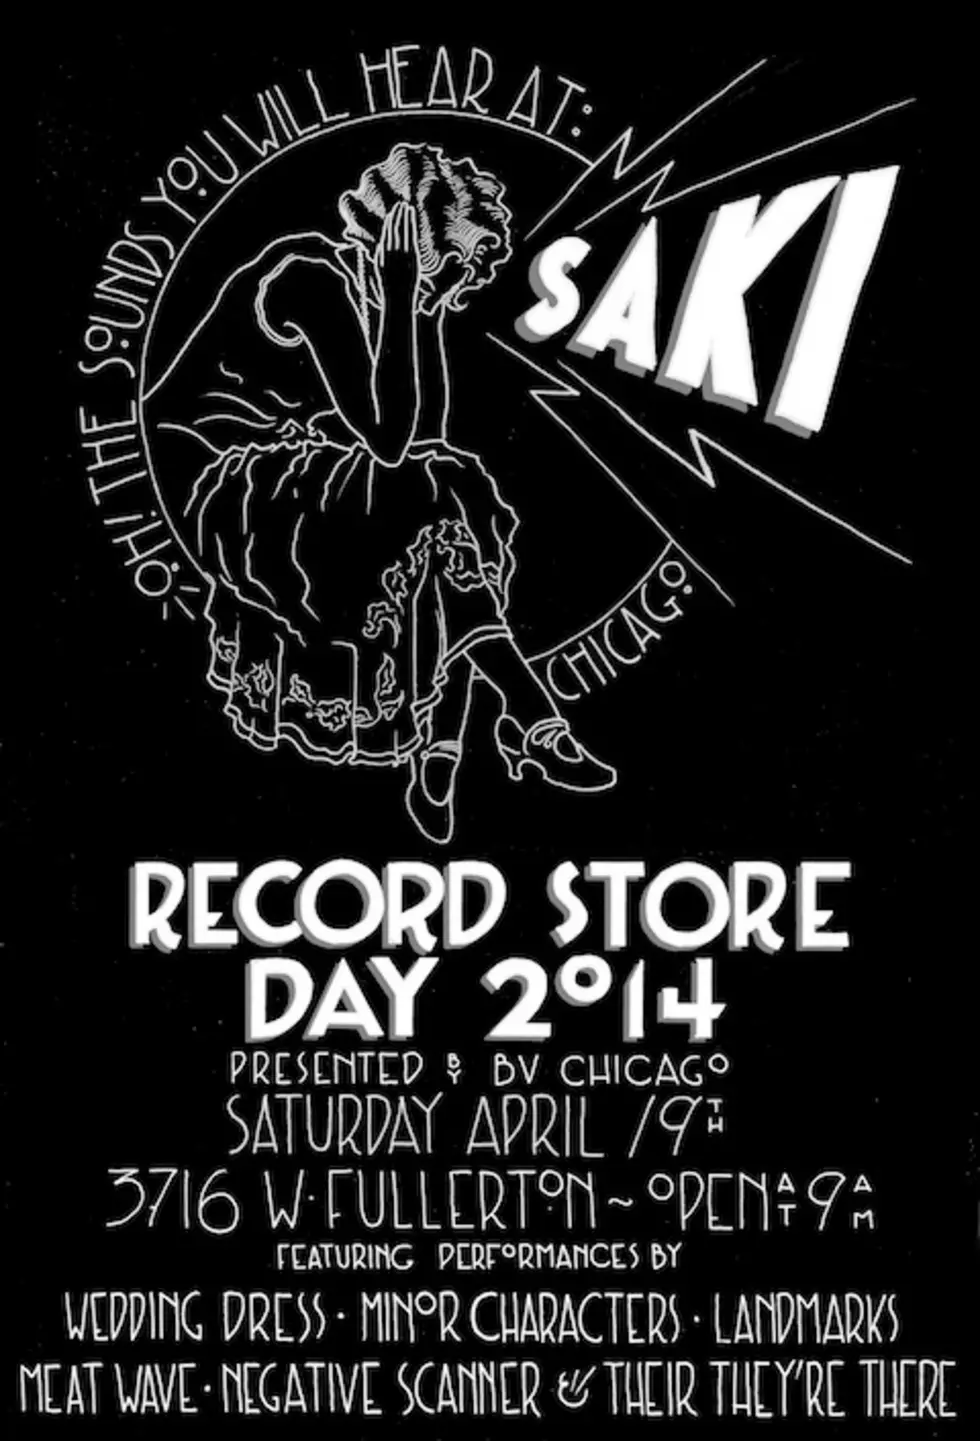 BV Chicago + Saki present: Record Store Day in-stores&#8212;&#8212;&#8211; Their / They&#8217;re / There, Meat Wave, Landmarks, more